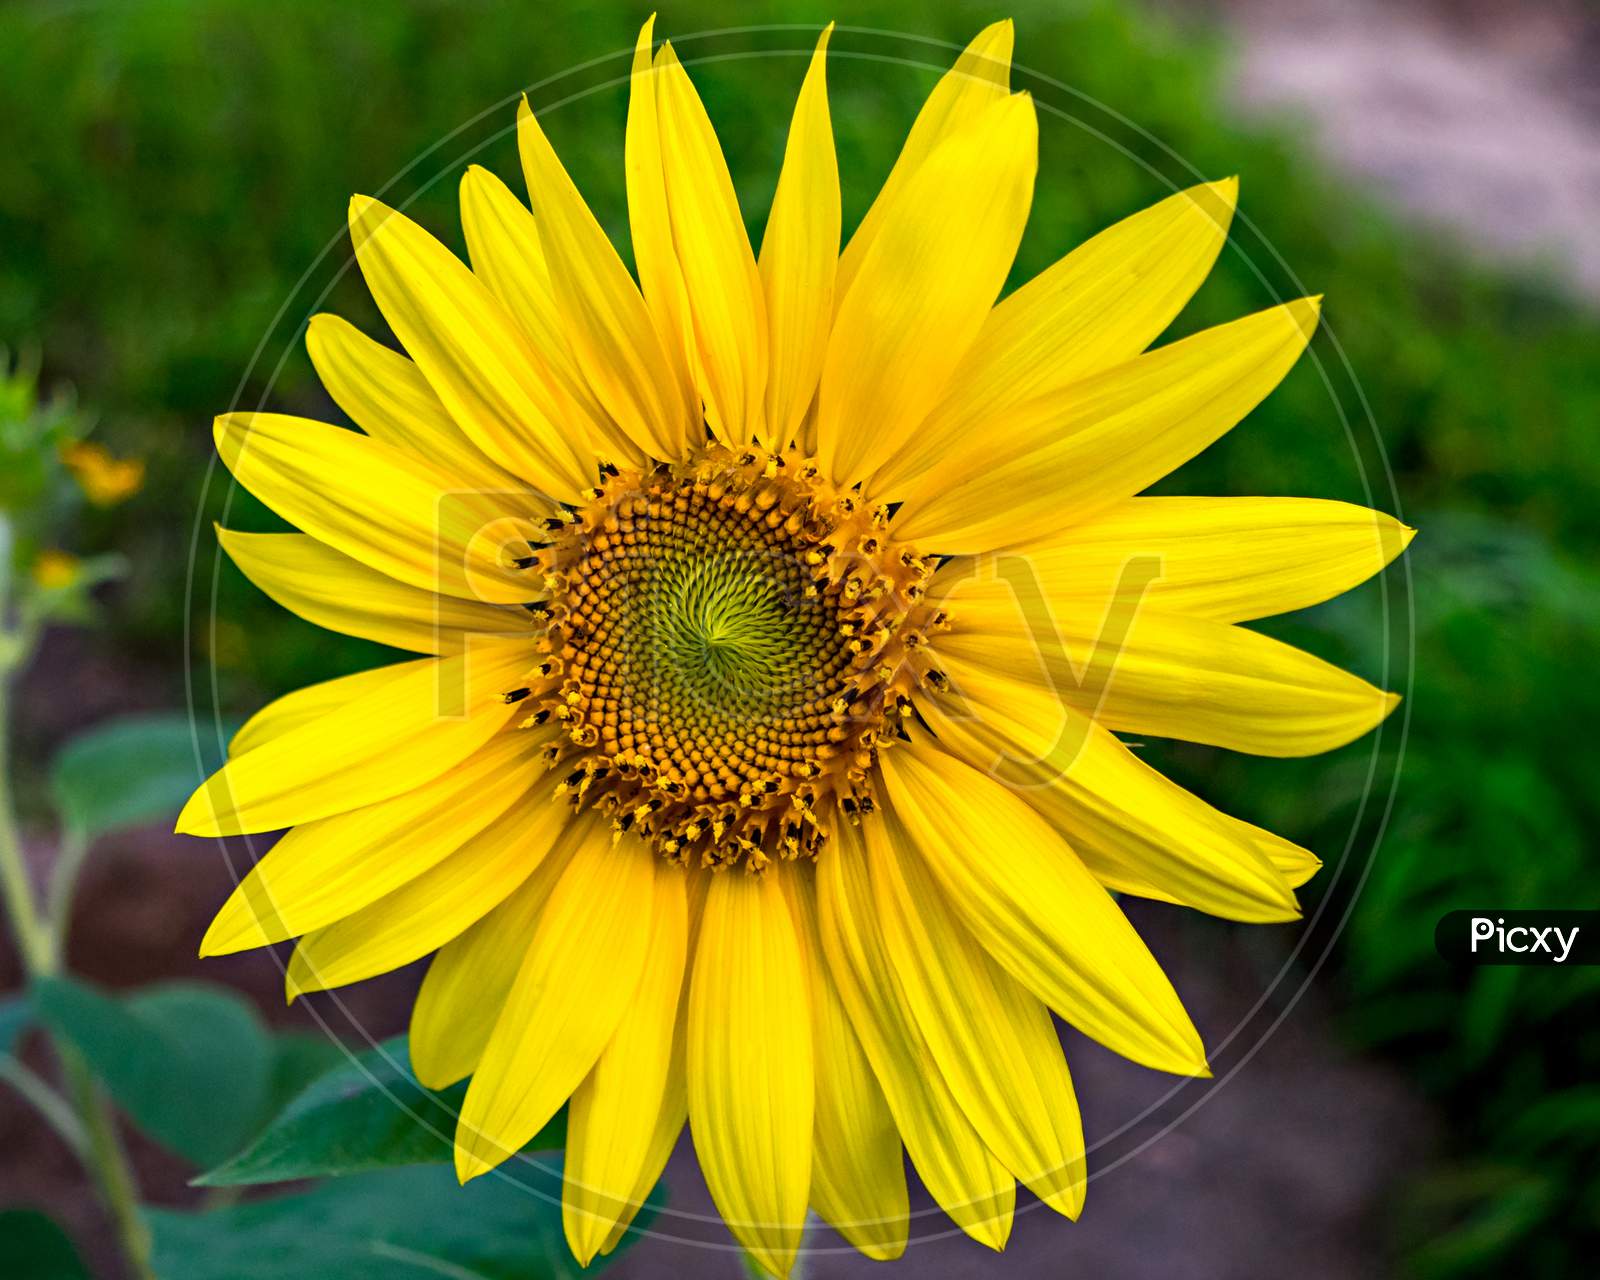 Selective Focus, Isolated Image Of A Sunflower Shinning In The Sunlight.